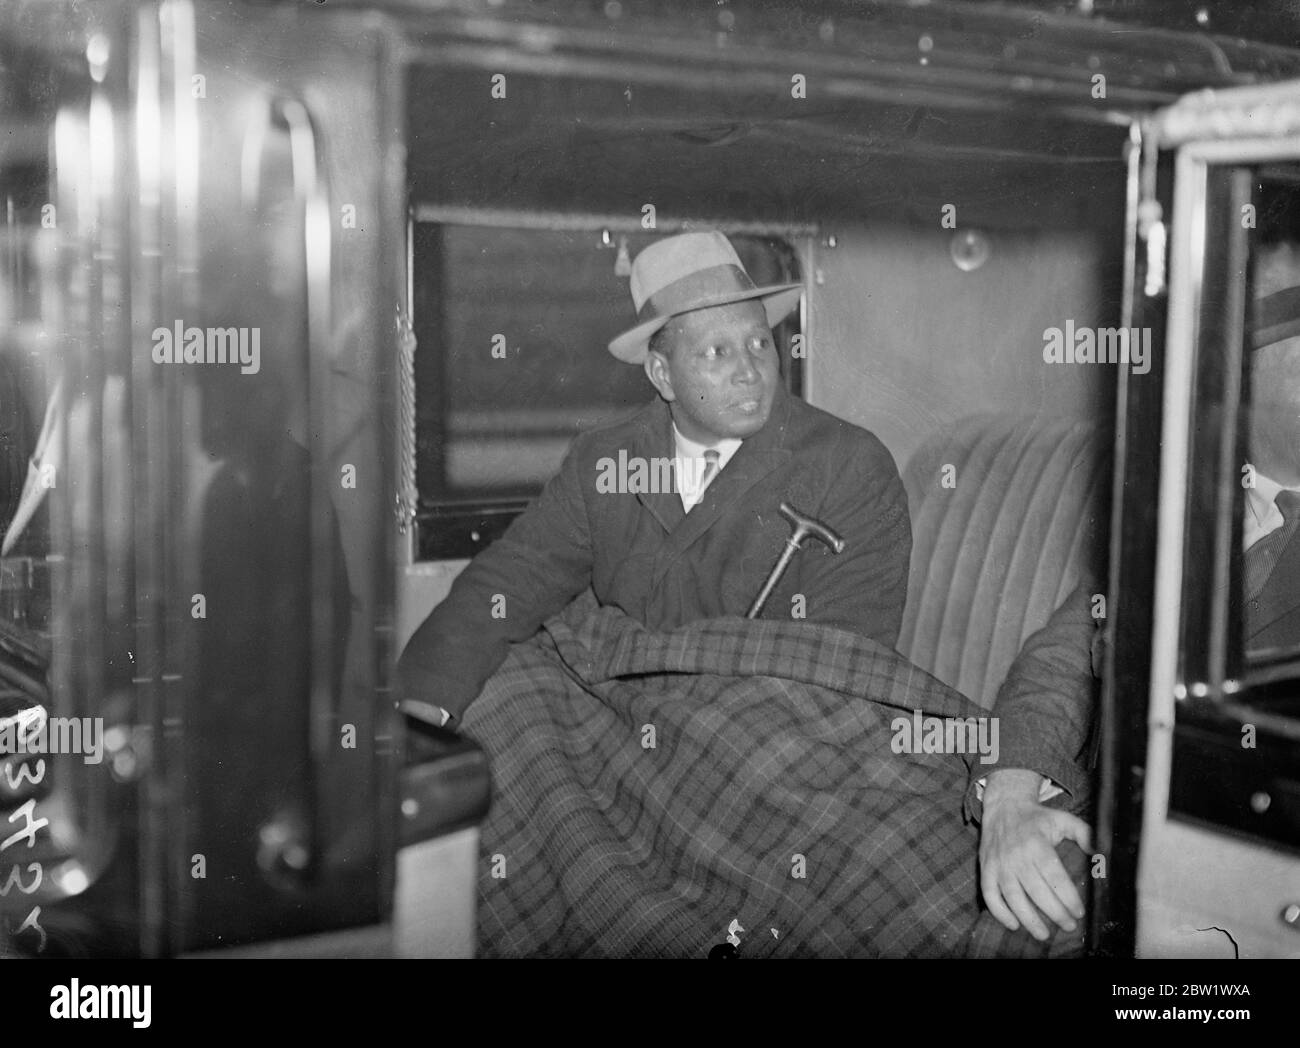 Malayan sultans will arise for Coronation. Britain's gold Kris for king. The Sultan of Pahang (Melaya) arrived at Victoria station, London, to attend the Coronation. As a gift for the King he has brought a gold Kris (the Malay dagger). Photo shows the Sultan of Pahang leaving Victoria, in his car. 14 April 1937 Stock Photo